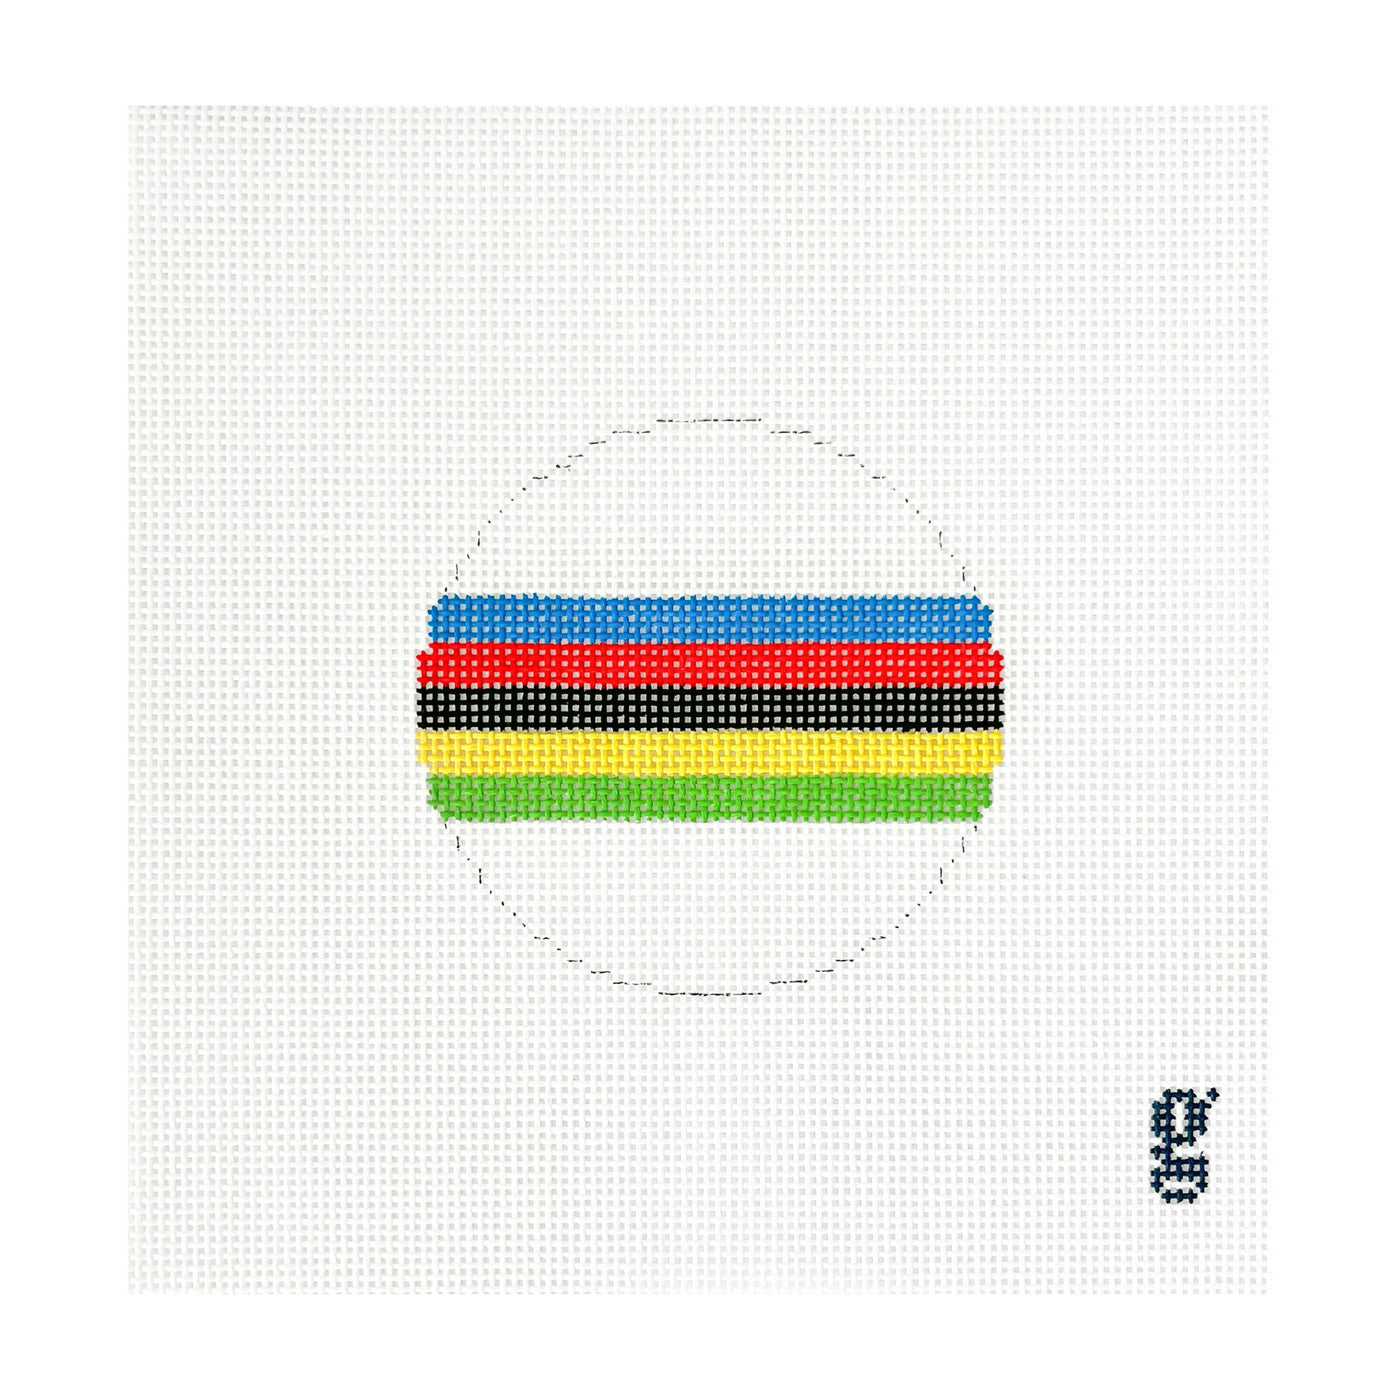 Square shaped needlepoint canvas featuring a 4 inch circle design with the cycling world champion rainbow stripes.